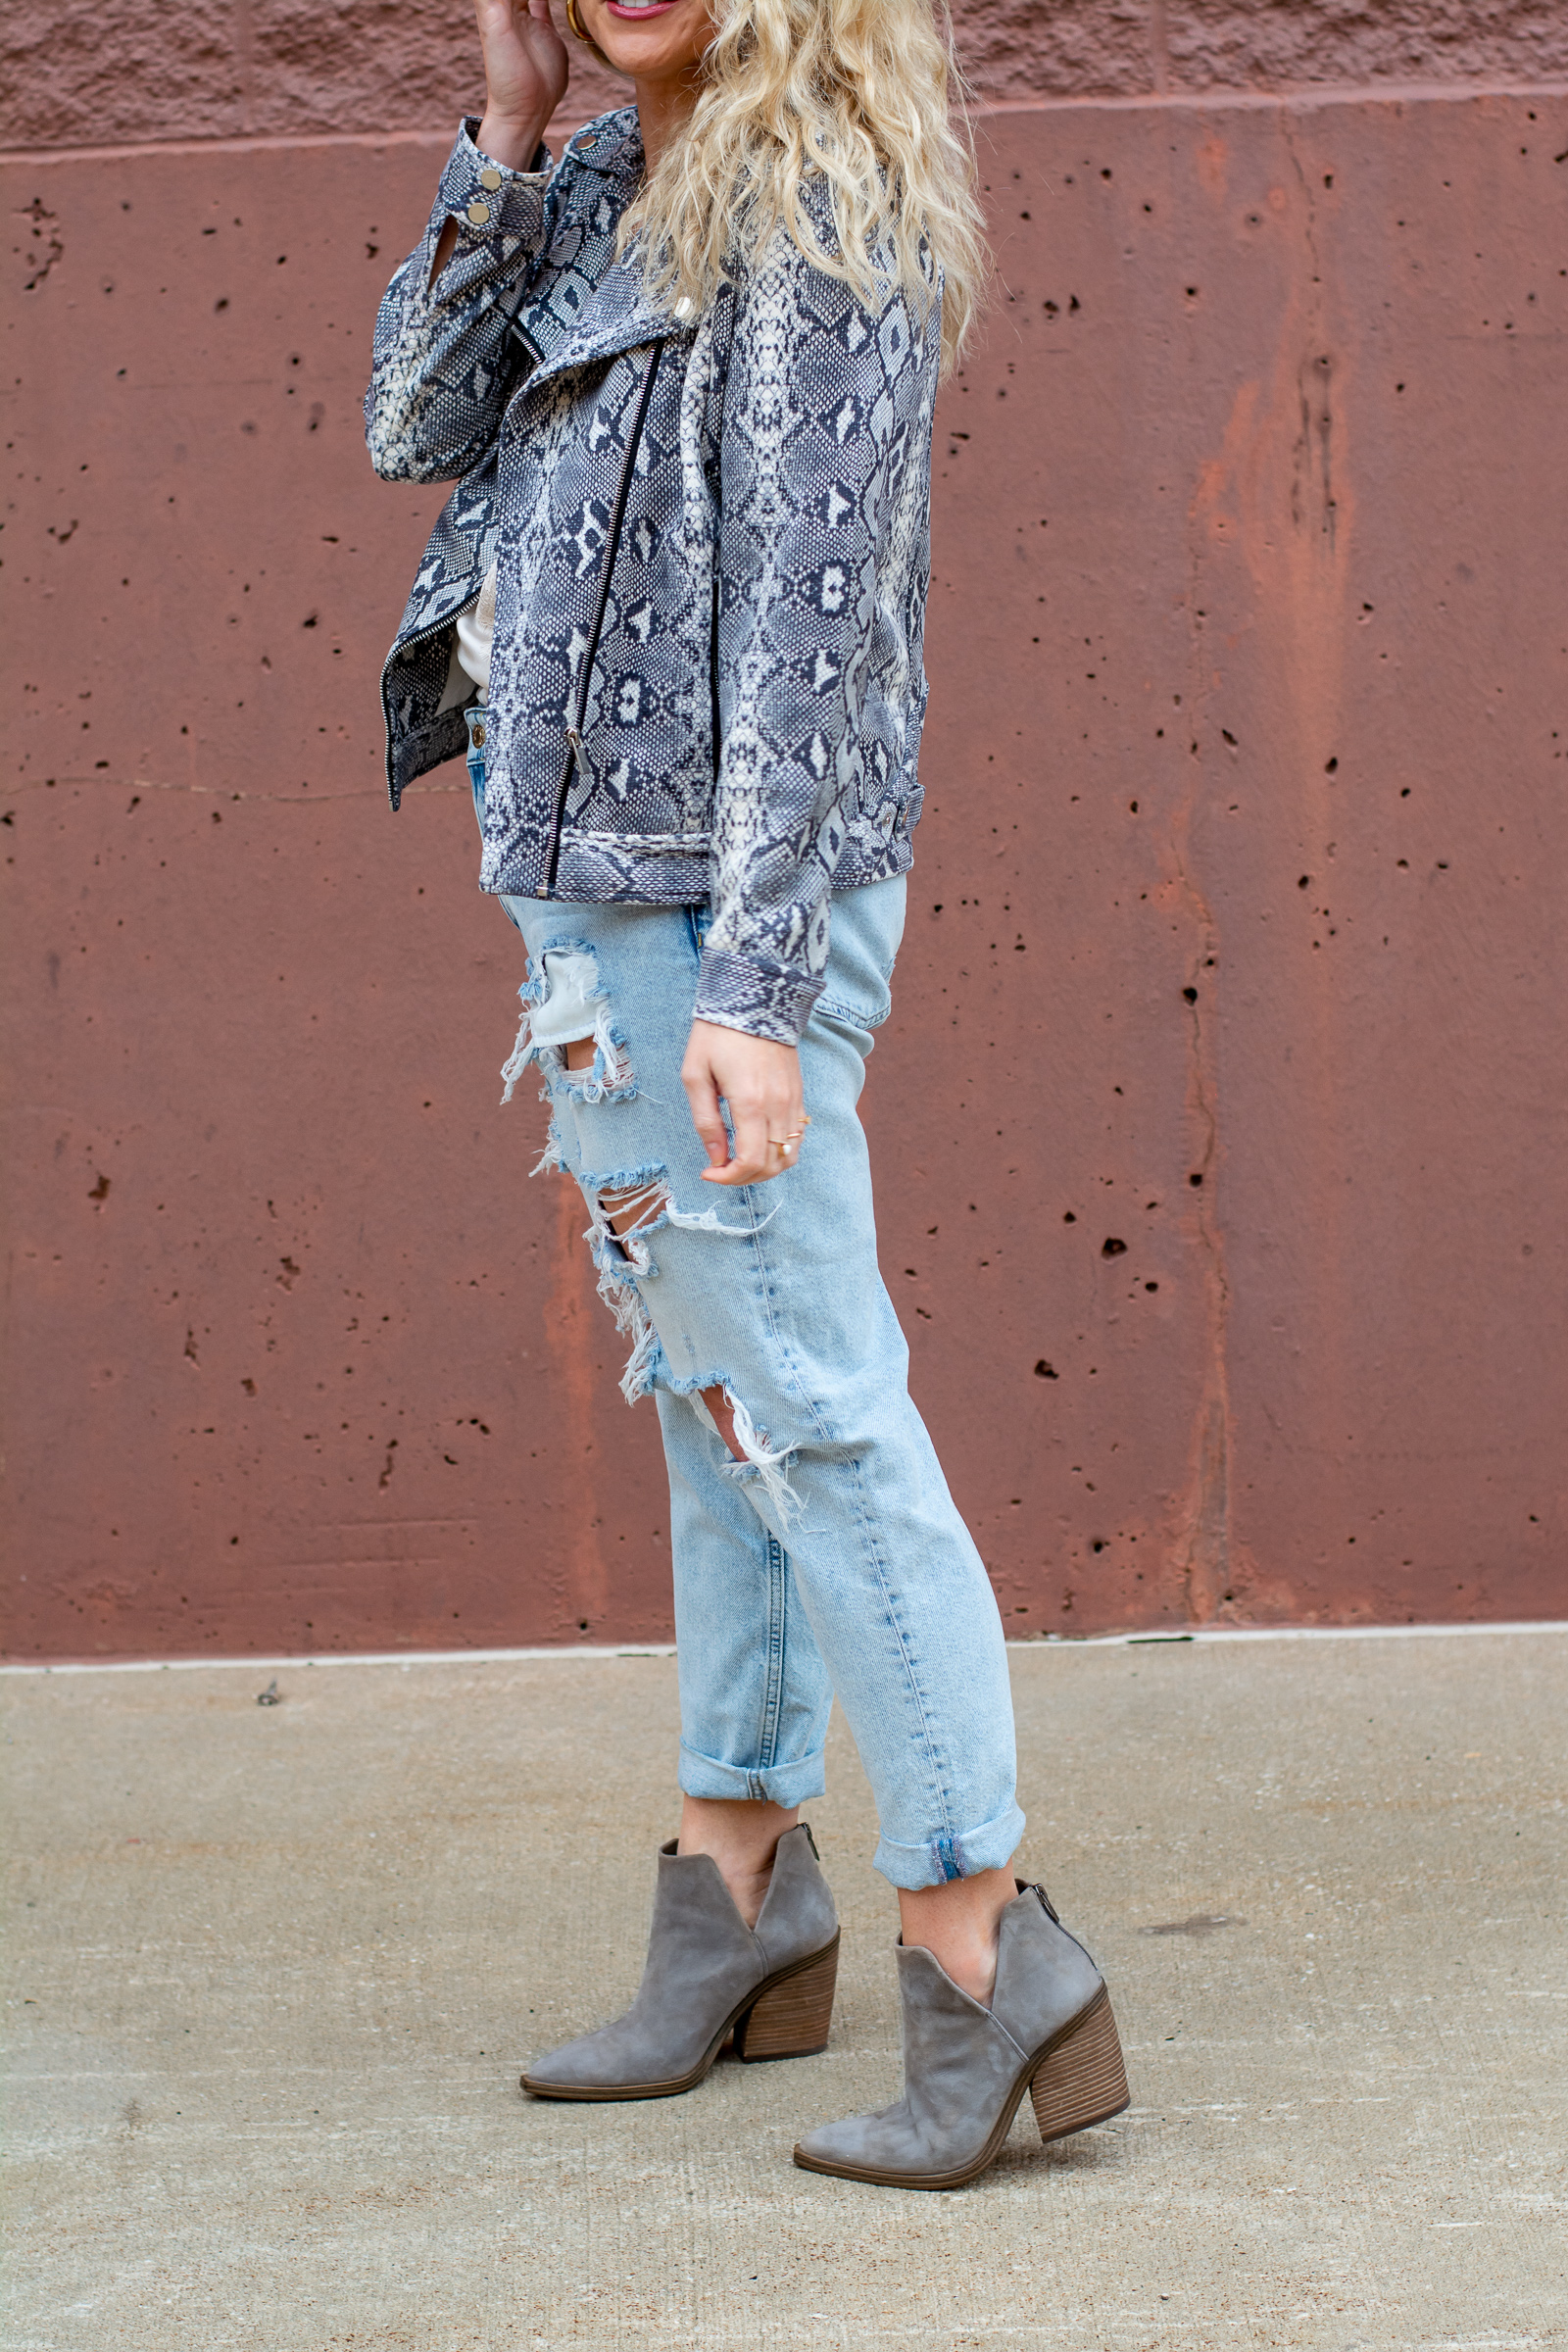 Fall Outfit: Lightweight Printed Jacket + Busted Jeans. | LSR